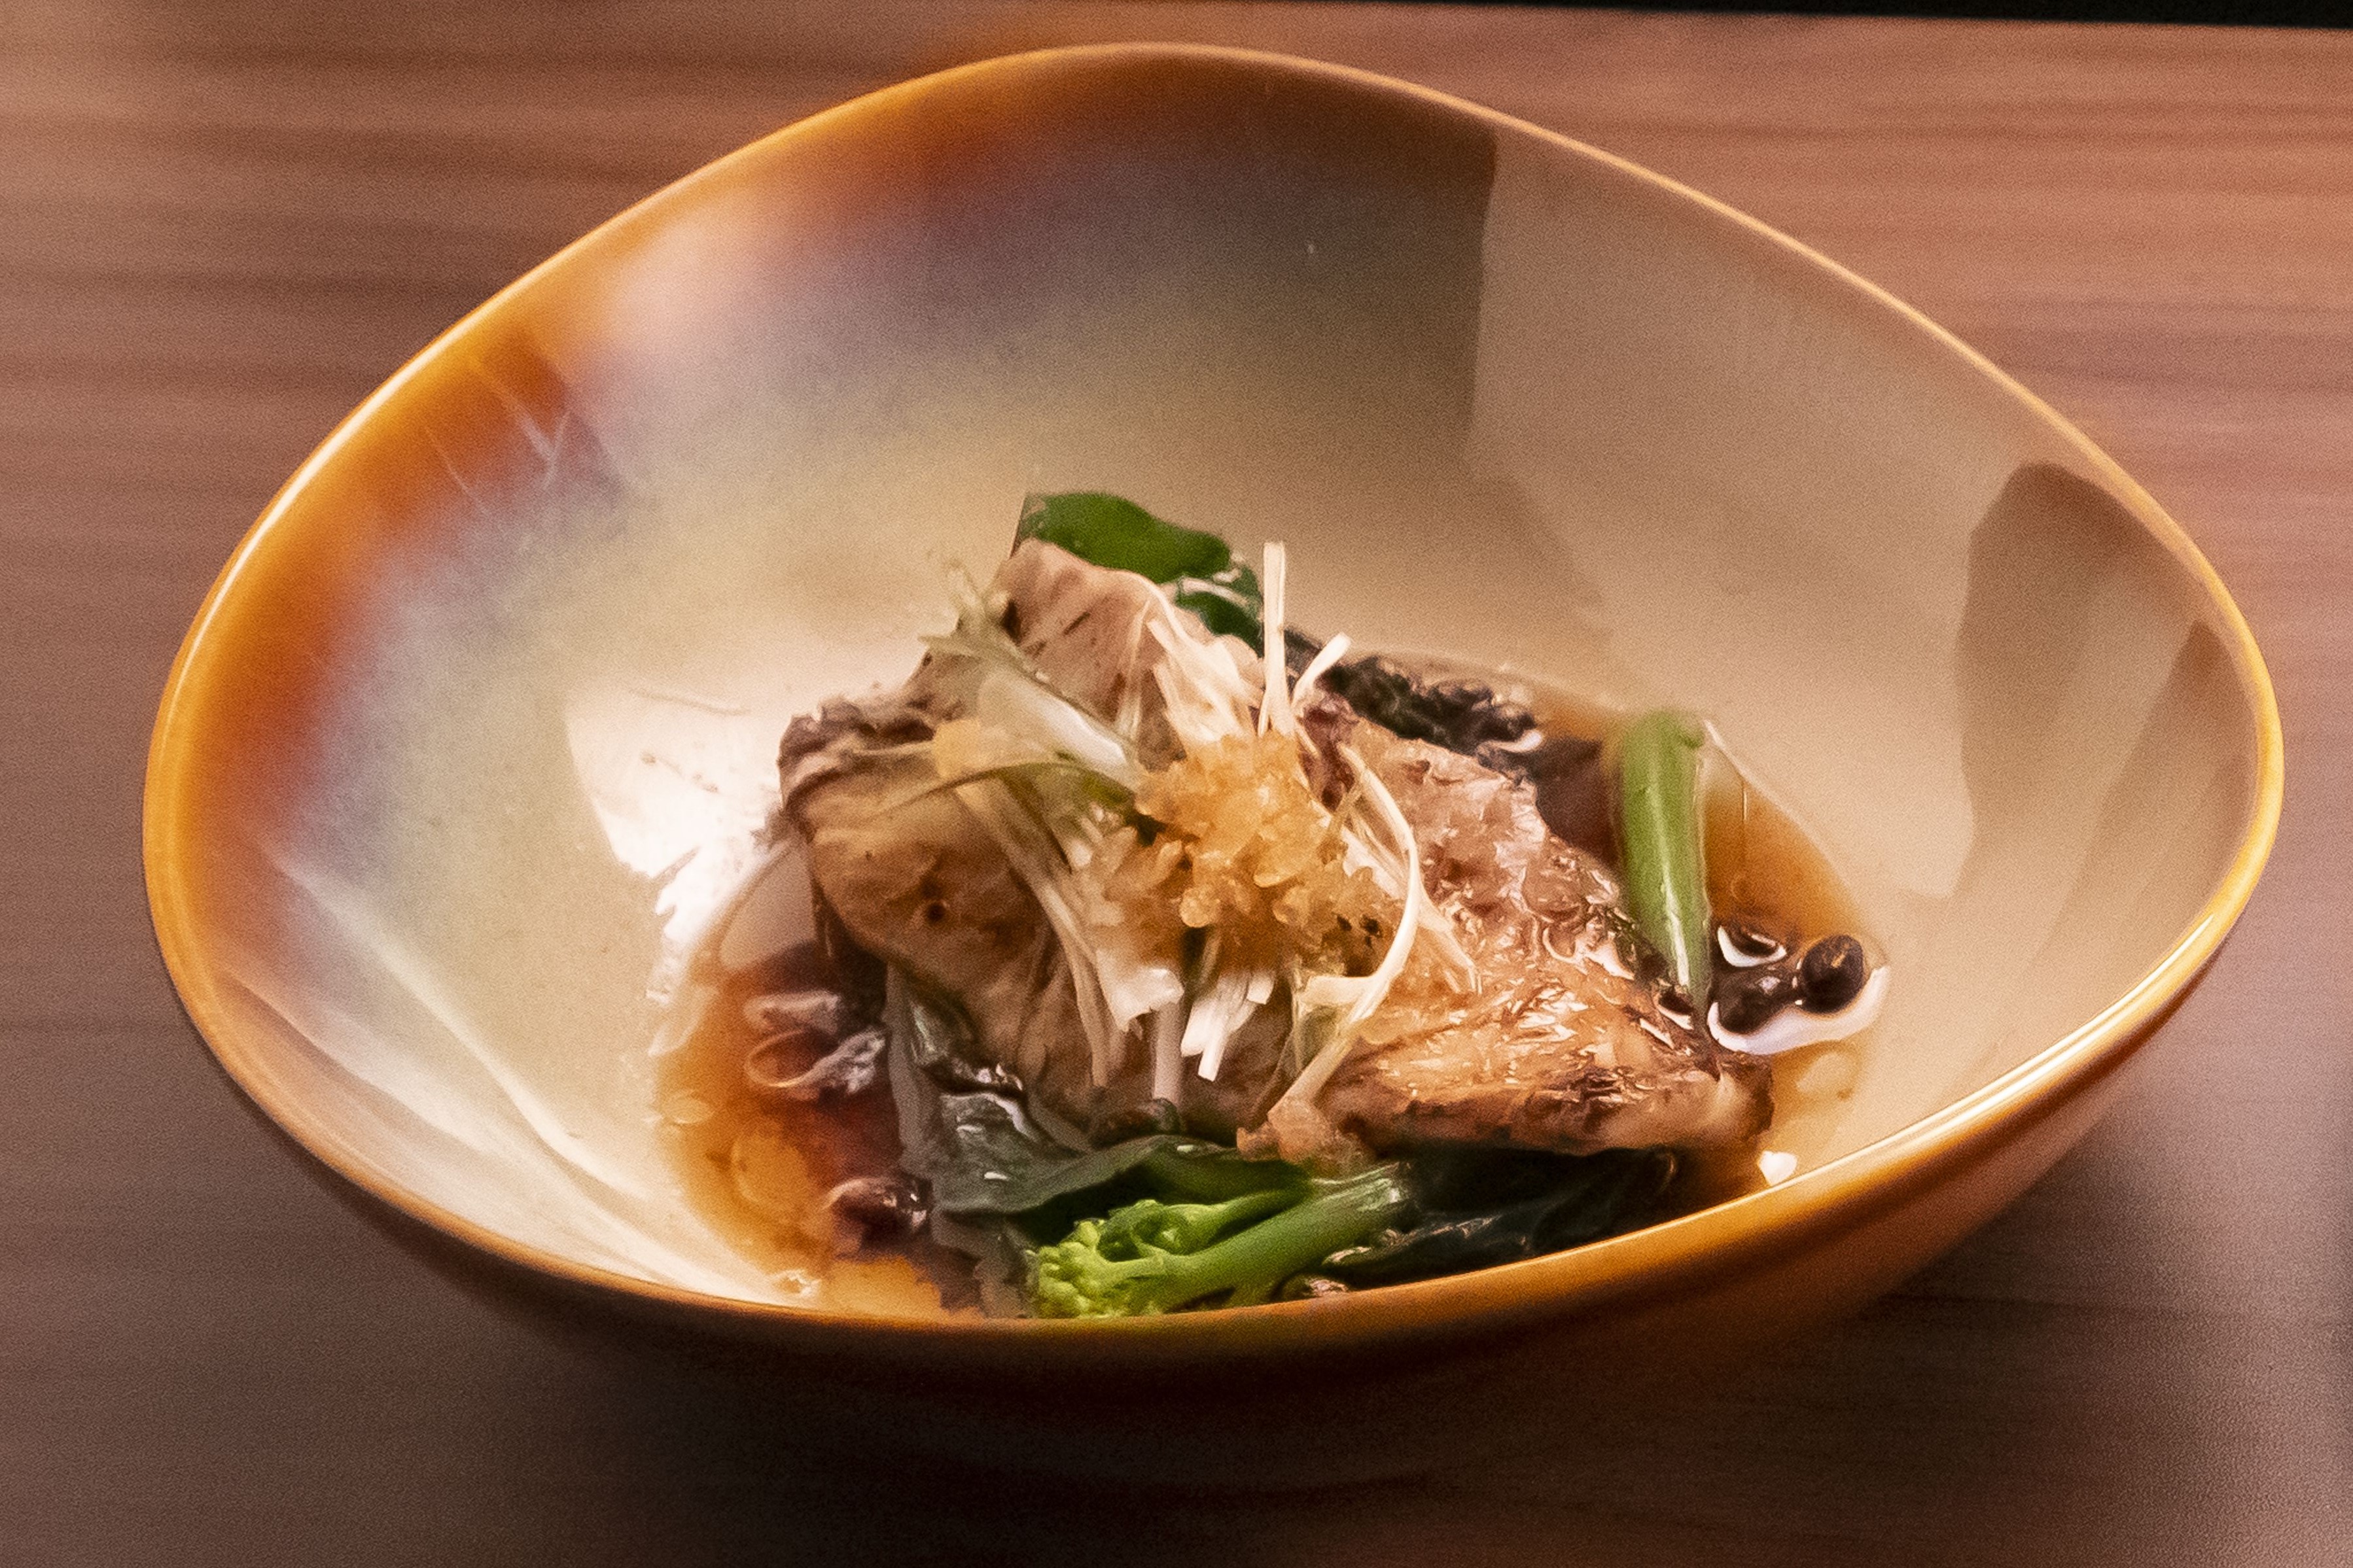 Teochew Black Bean Steamed Jade Perch with Chinese Greens and Sake Broth